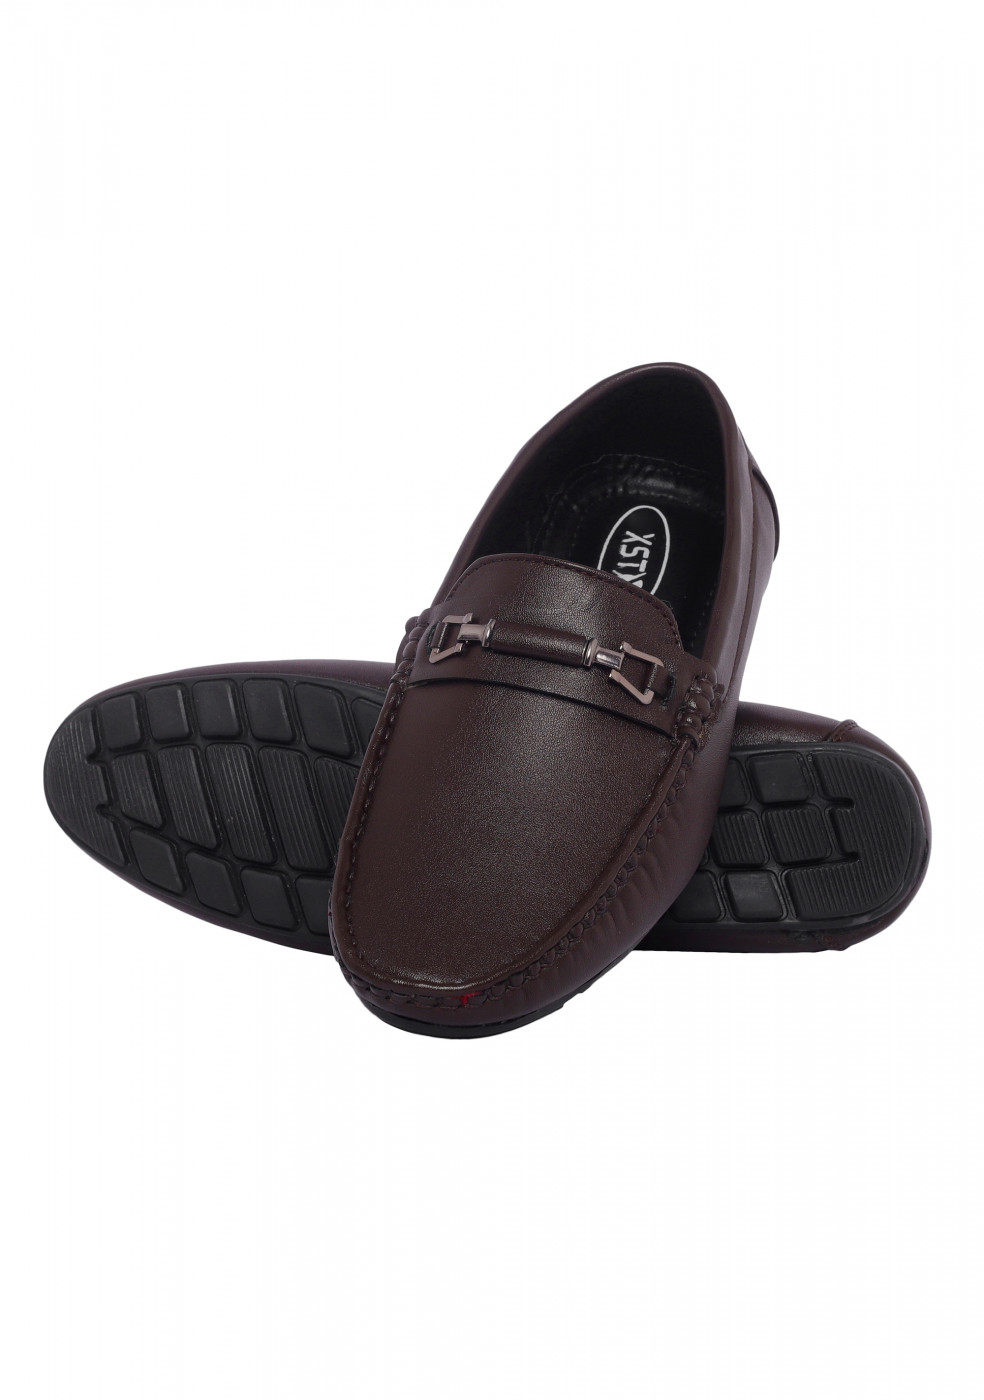 XSTOM Stylish Brown Loafers For Men